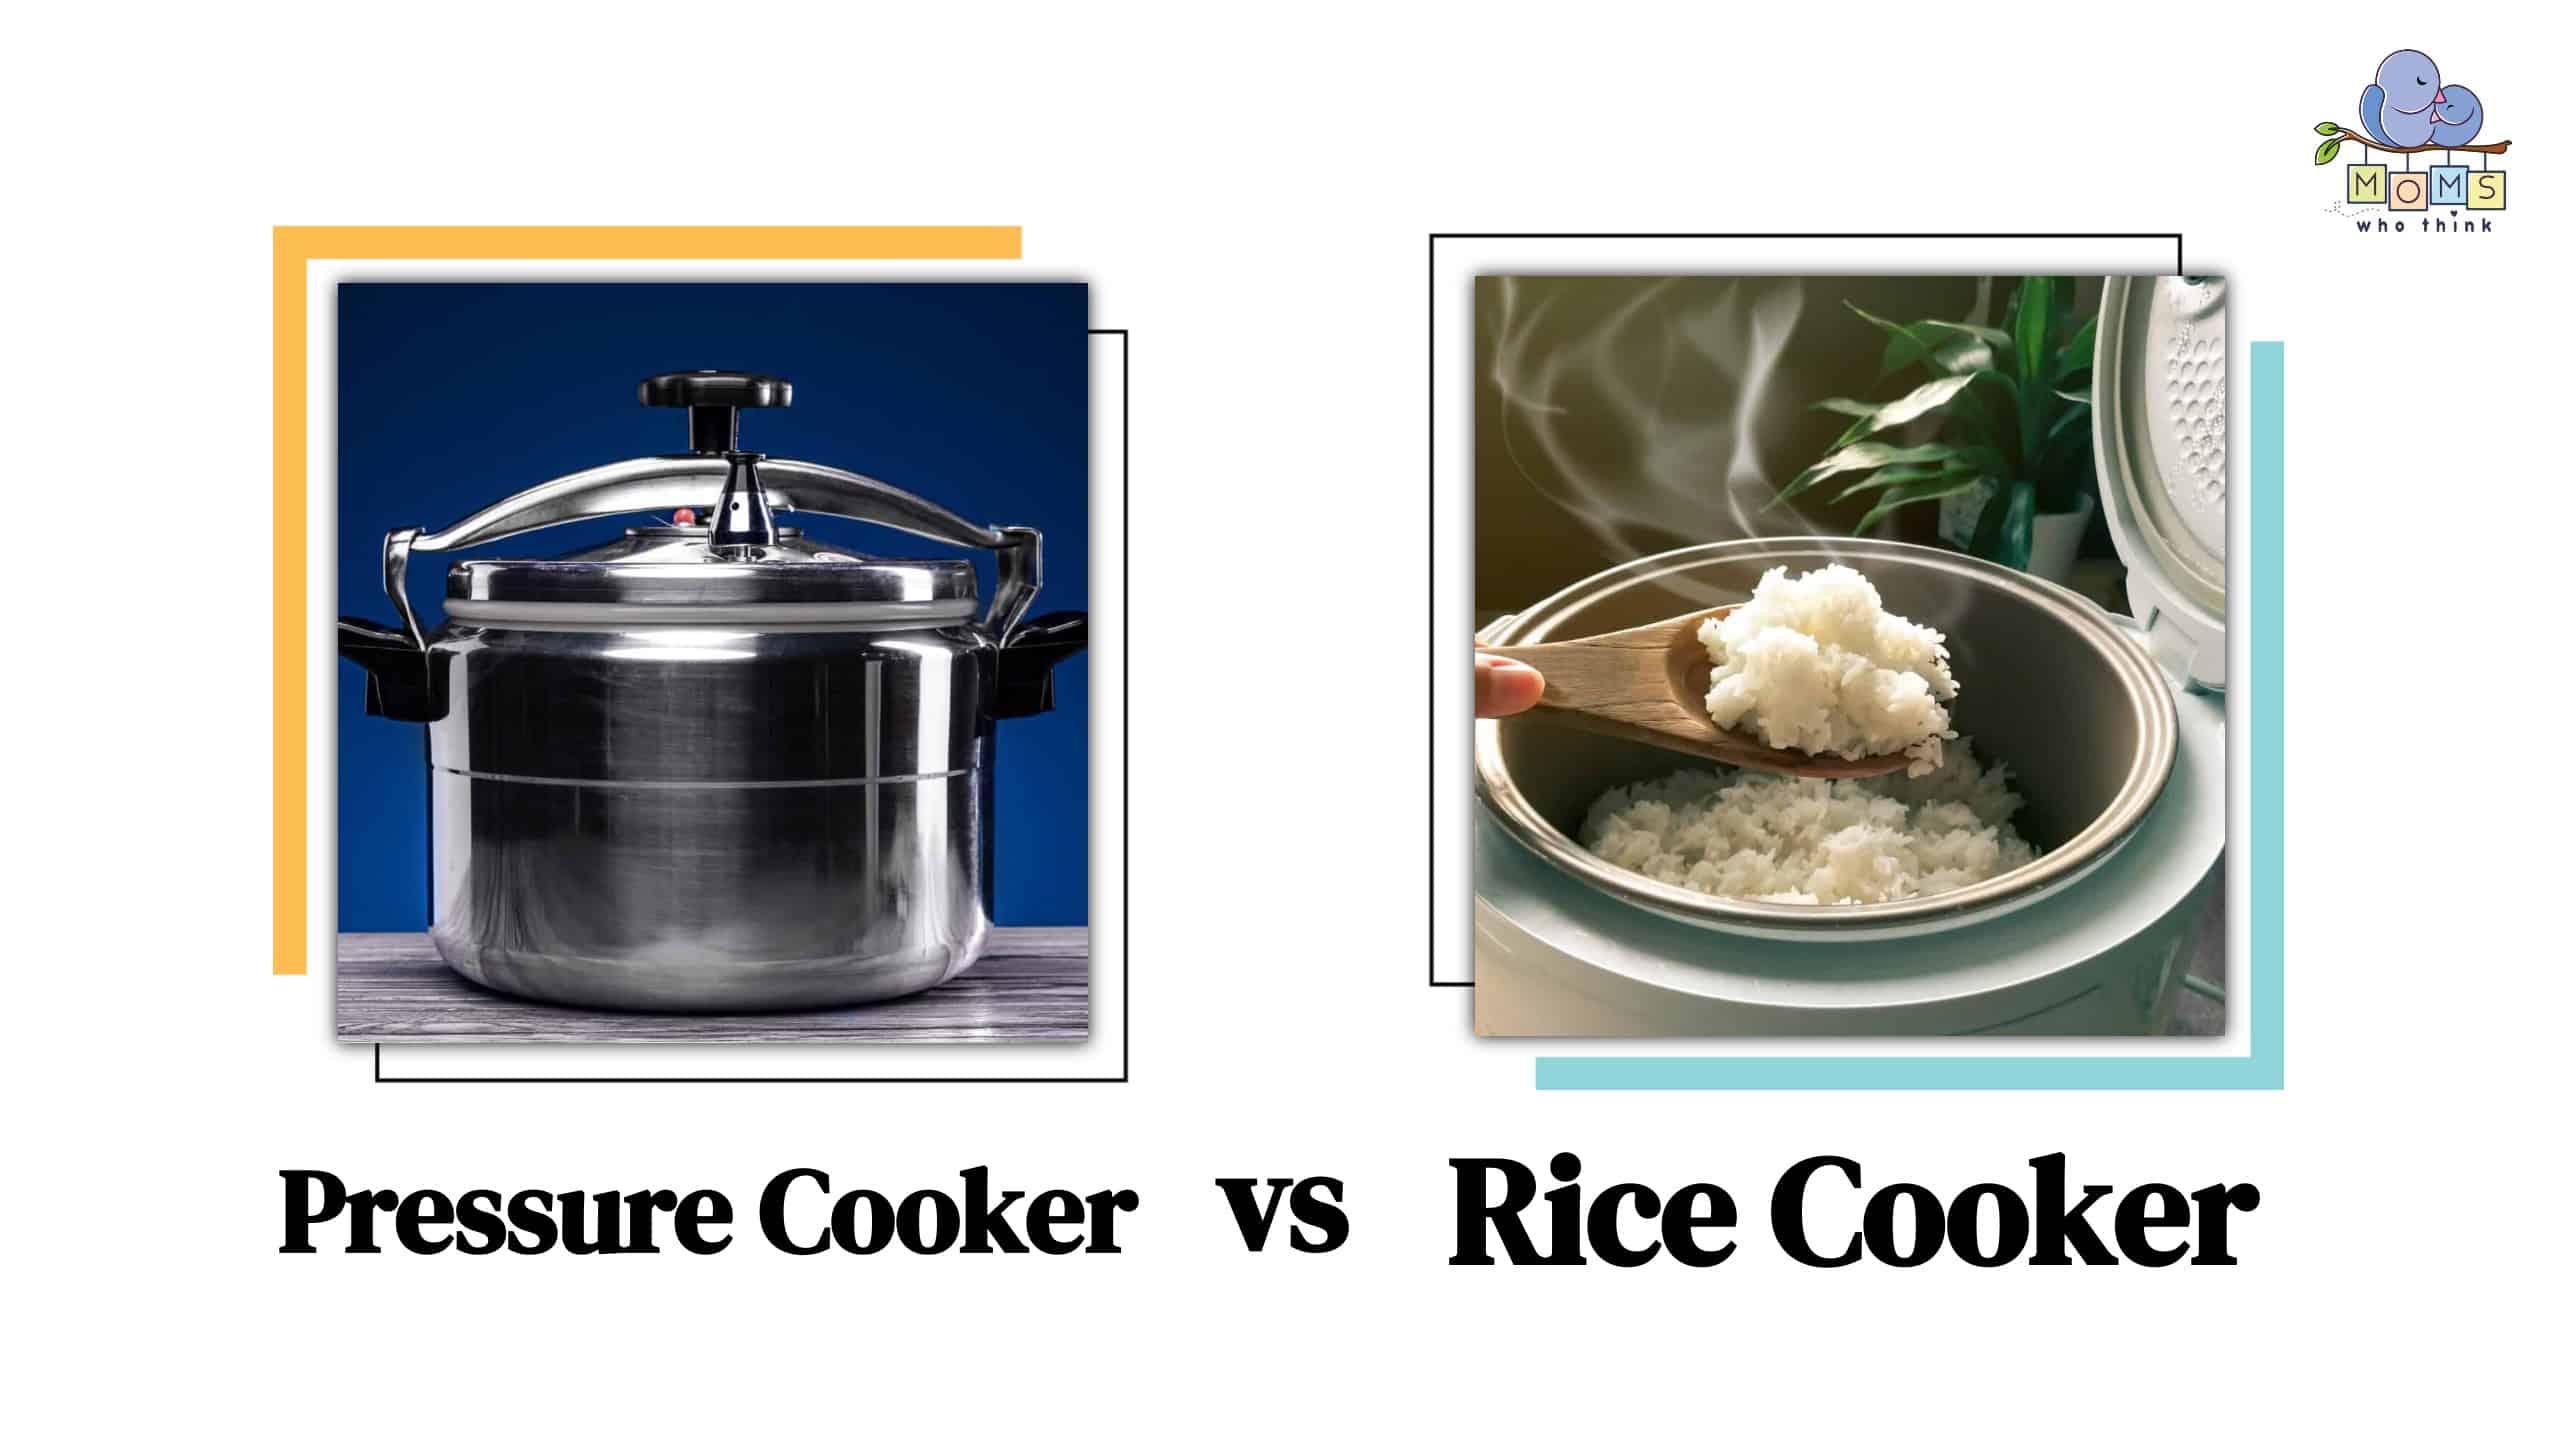 Pressure Cooker vs. Rice Cooker: Which Do You Need For Your Kitchen?